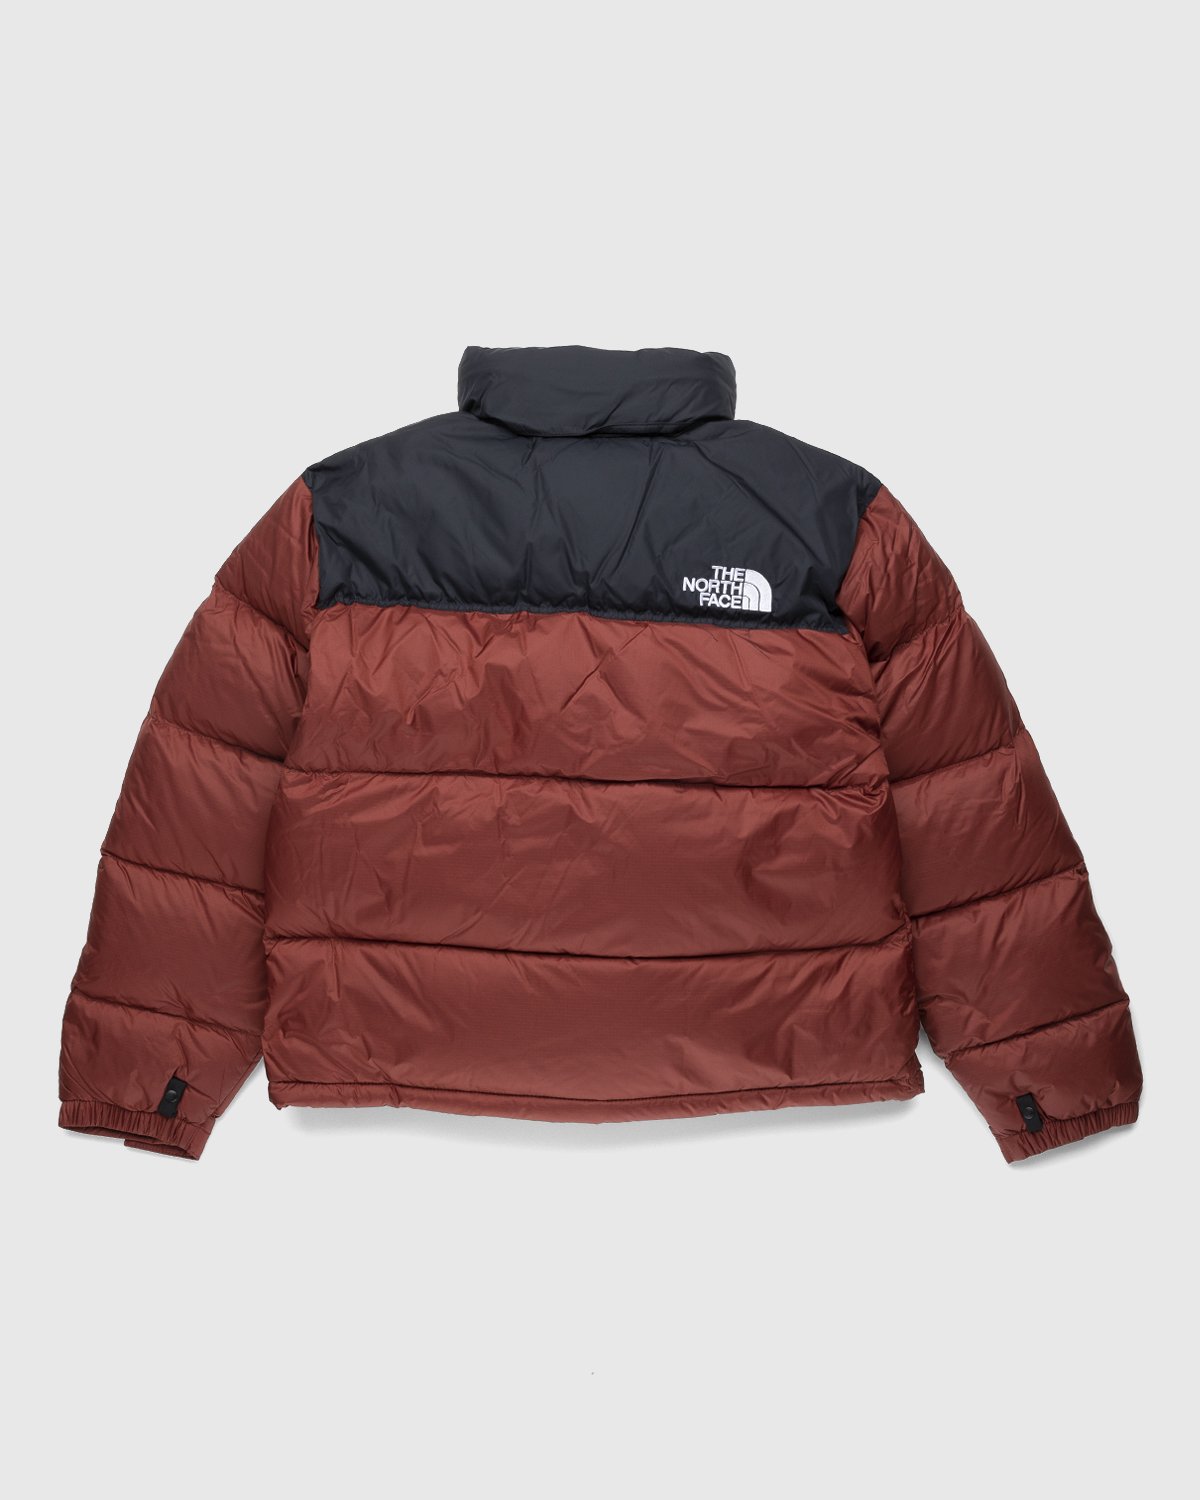 The North Face - 1996 Retro Nuptse Jacket Brick House Red - Clothing - Red - Image 2